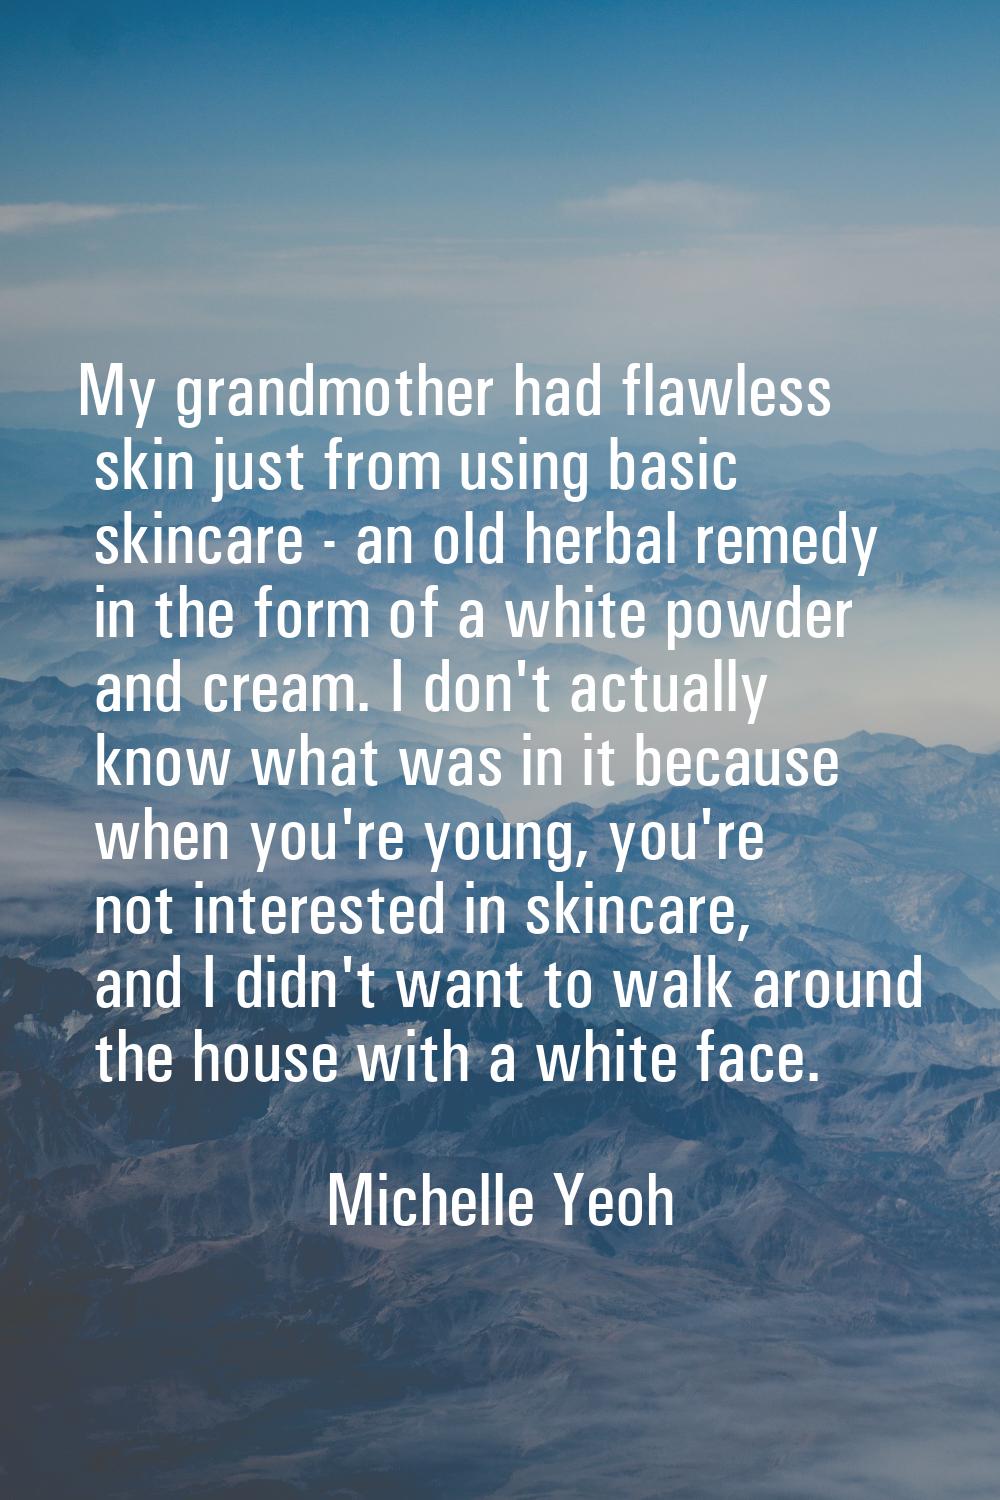 My grandmother had flawless skin just from using basic skincare - an old herbal remedy in the form 